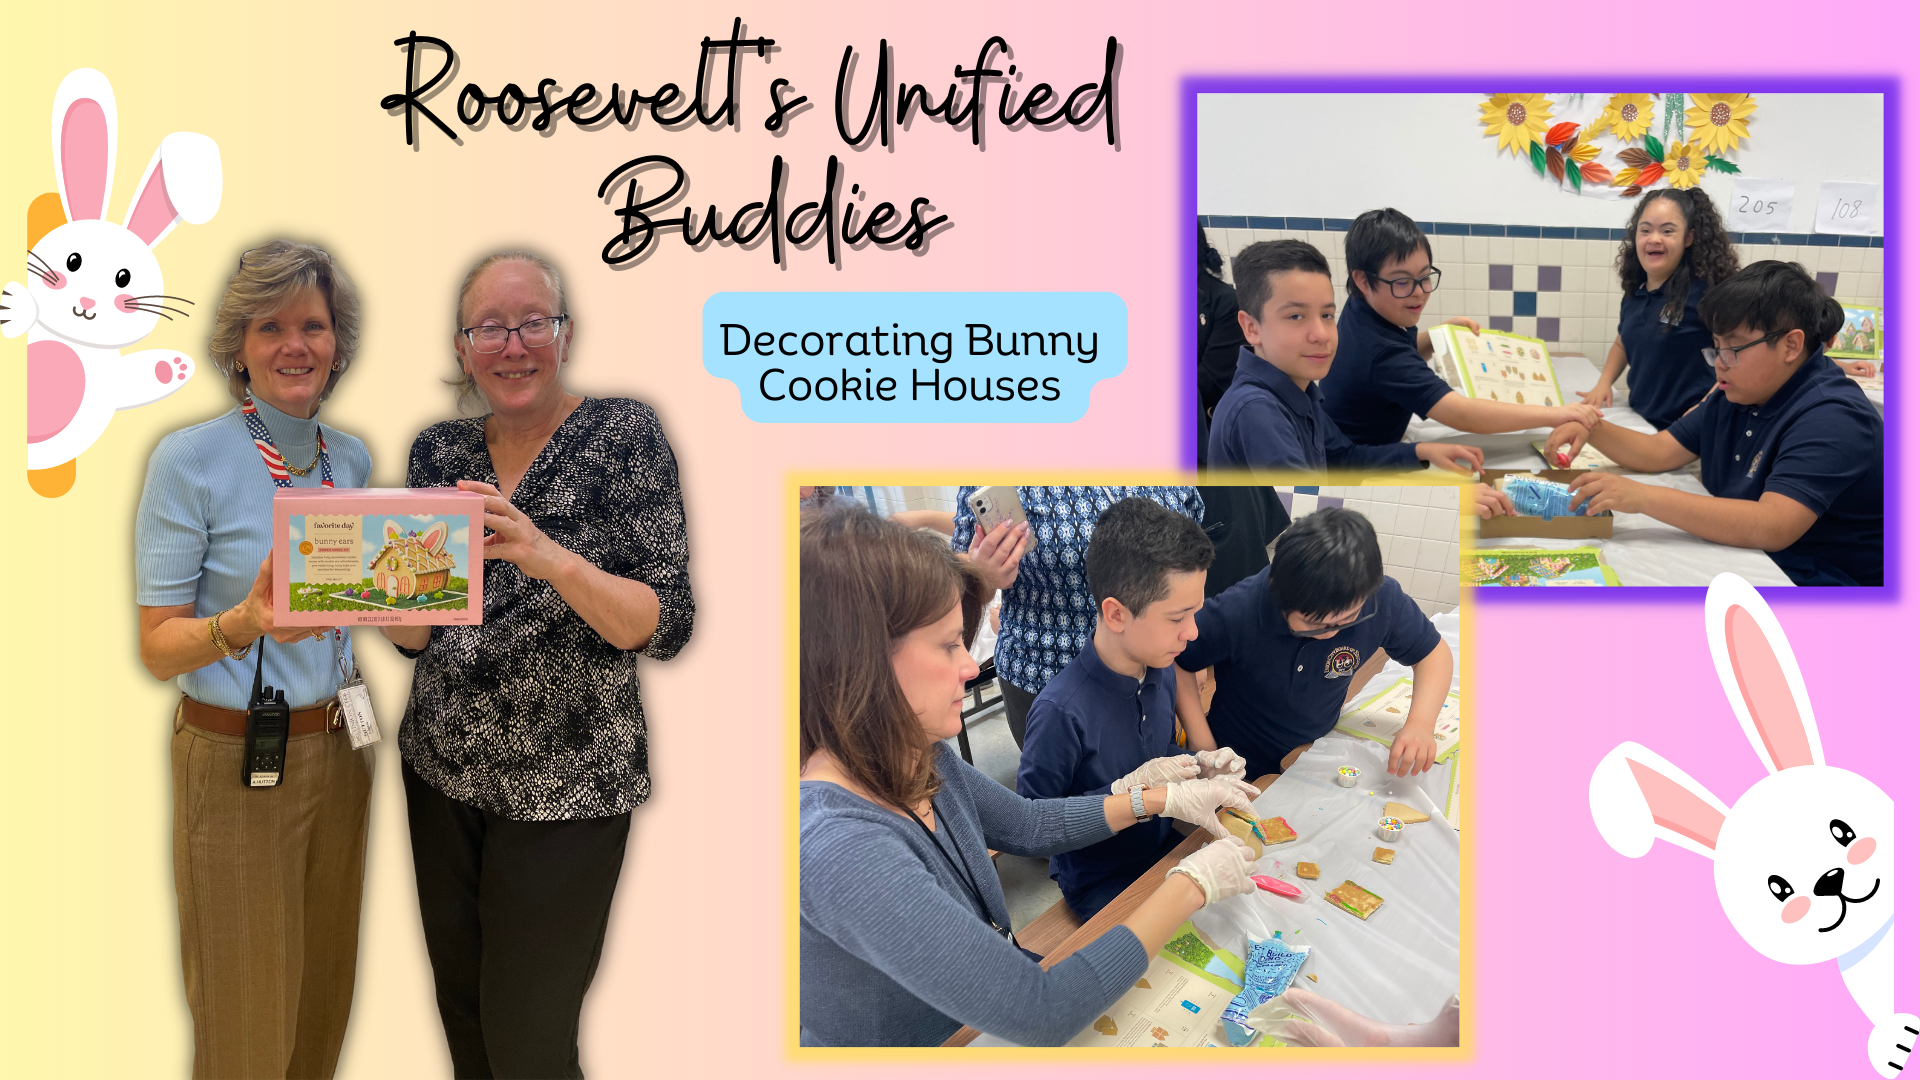 The Unified Buddies Program at the Roosevelt School